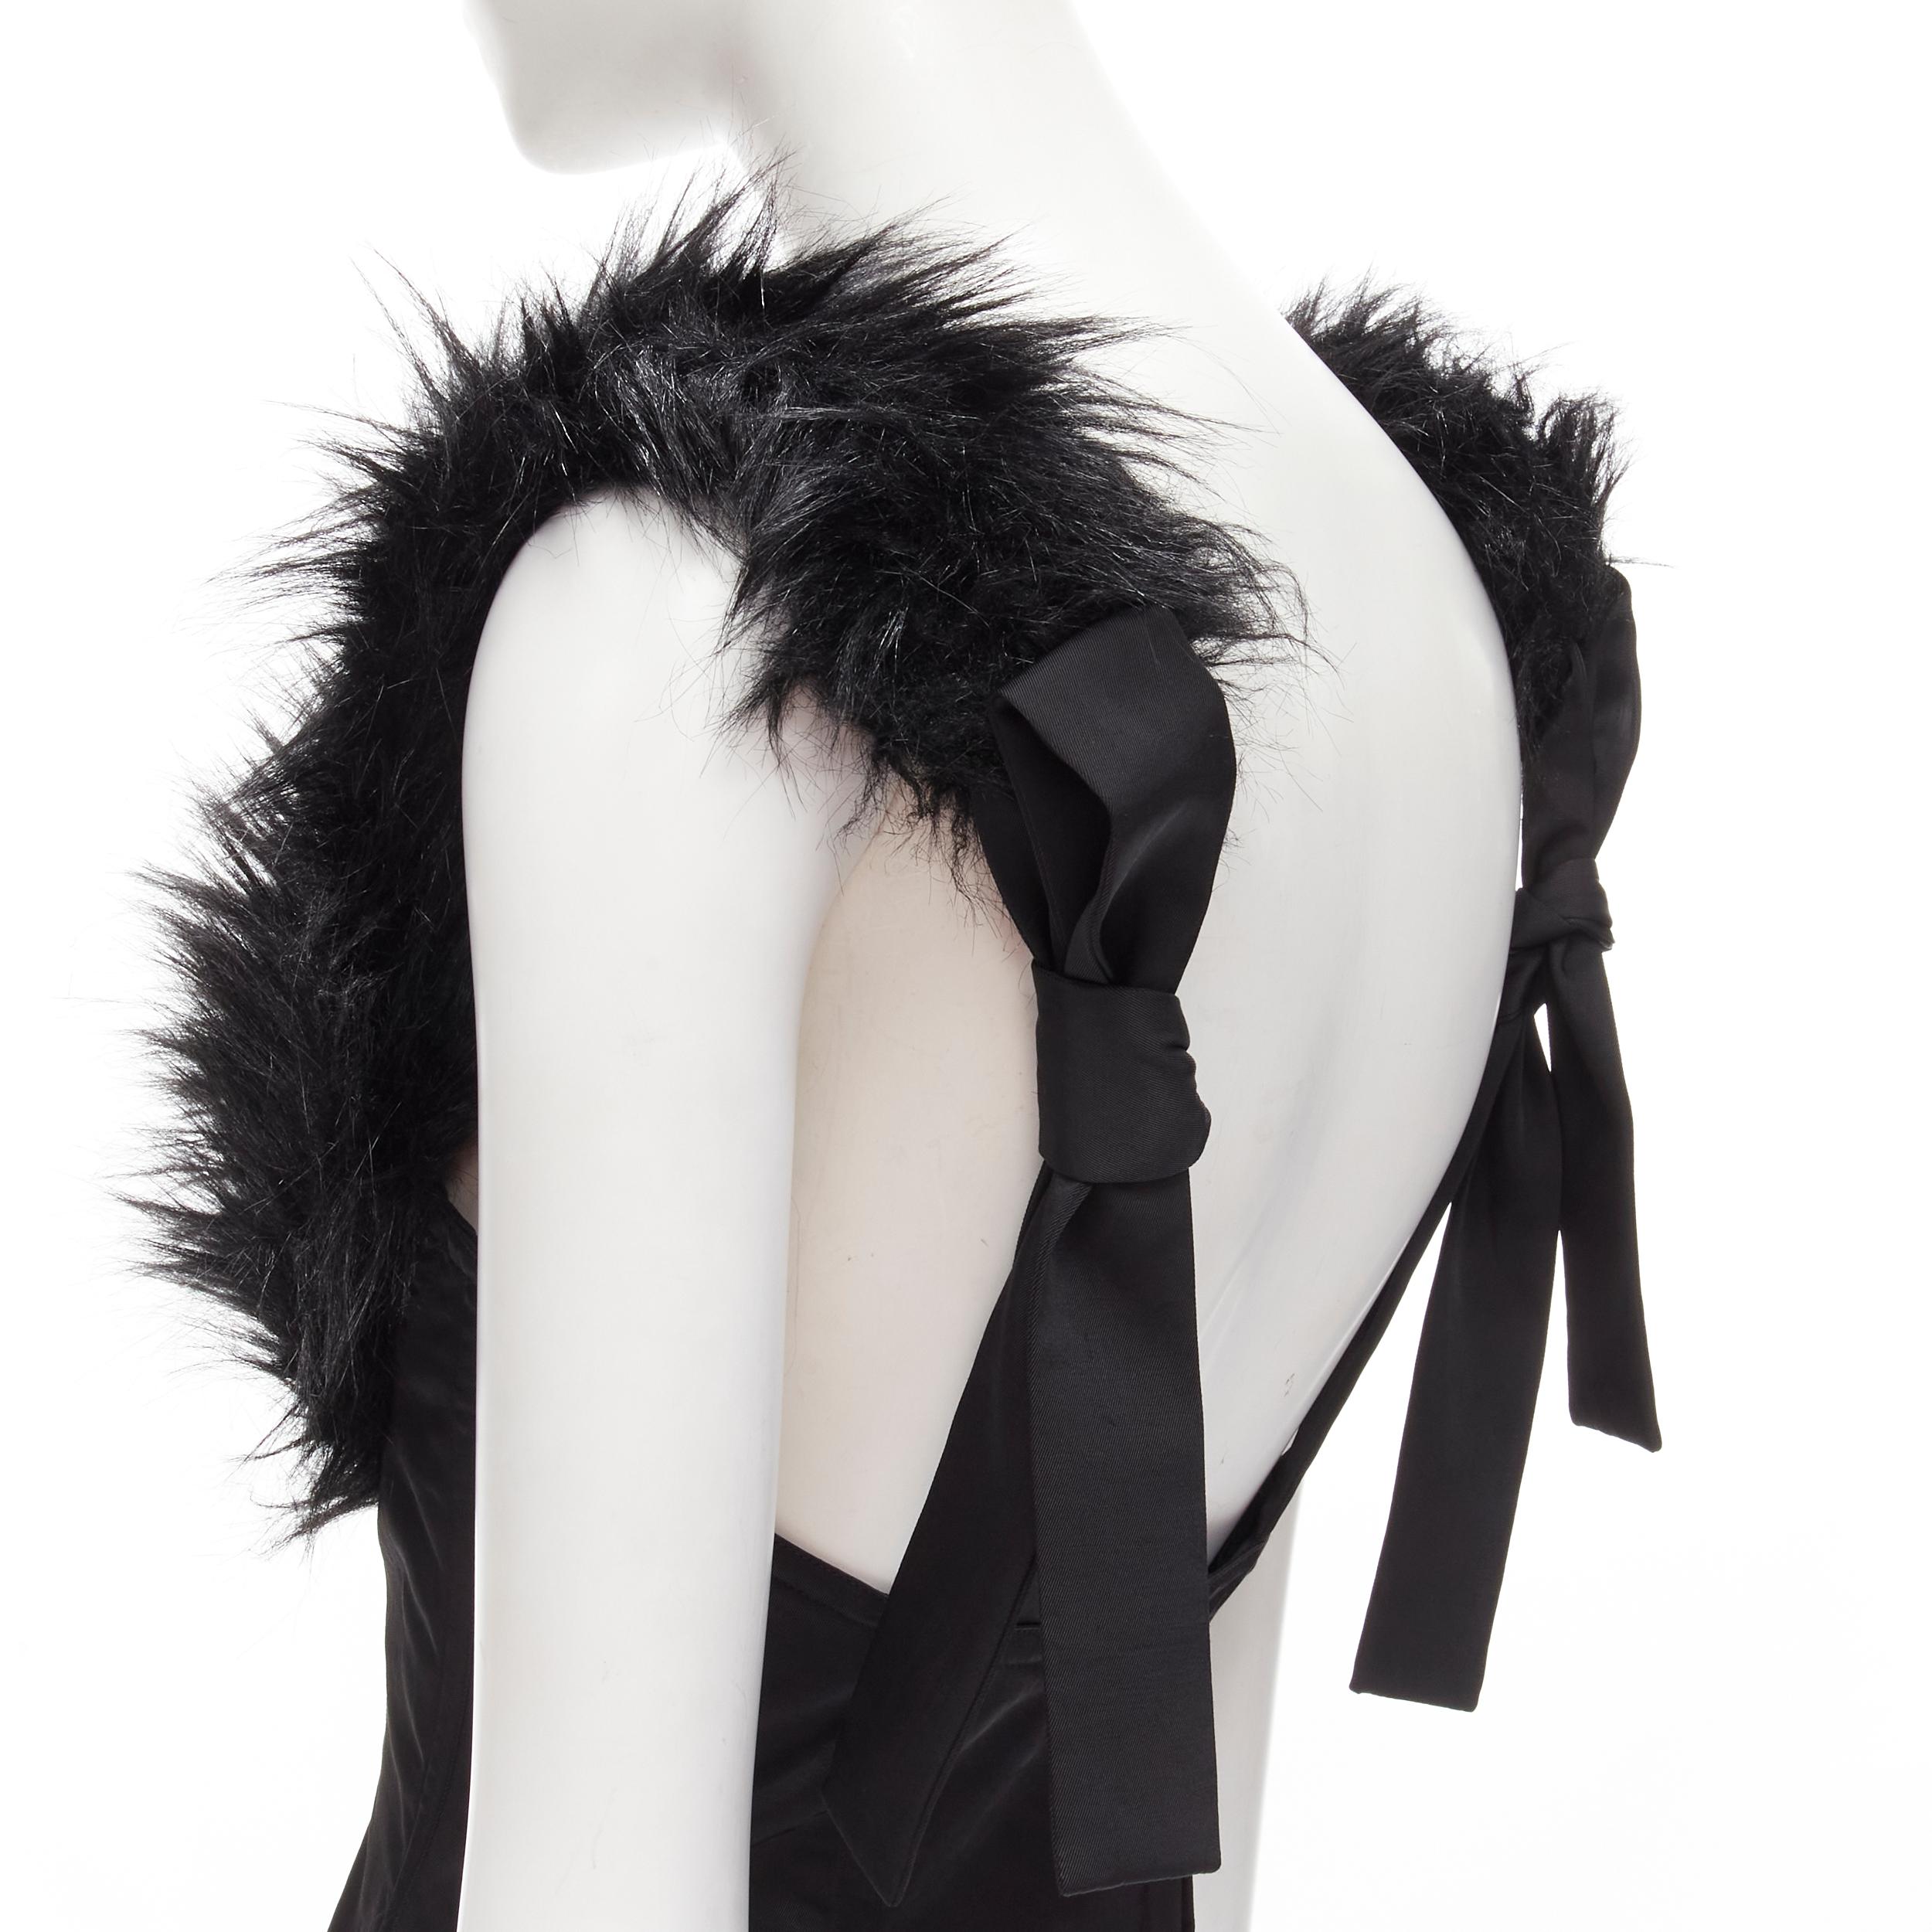 rare Y3 YOHJI YAMAMOTO ADIDAS black faux fur scoop collar boned corset top S
Brand: Y3
Extra Detail: Faux fur trim scoop neckline. Bow tie detail at back strap. Wired boned corset. Zip back closure.

CONDITION:
Condition: Excellent, this item was